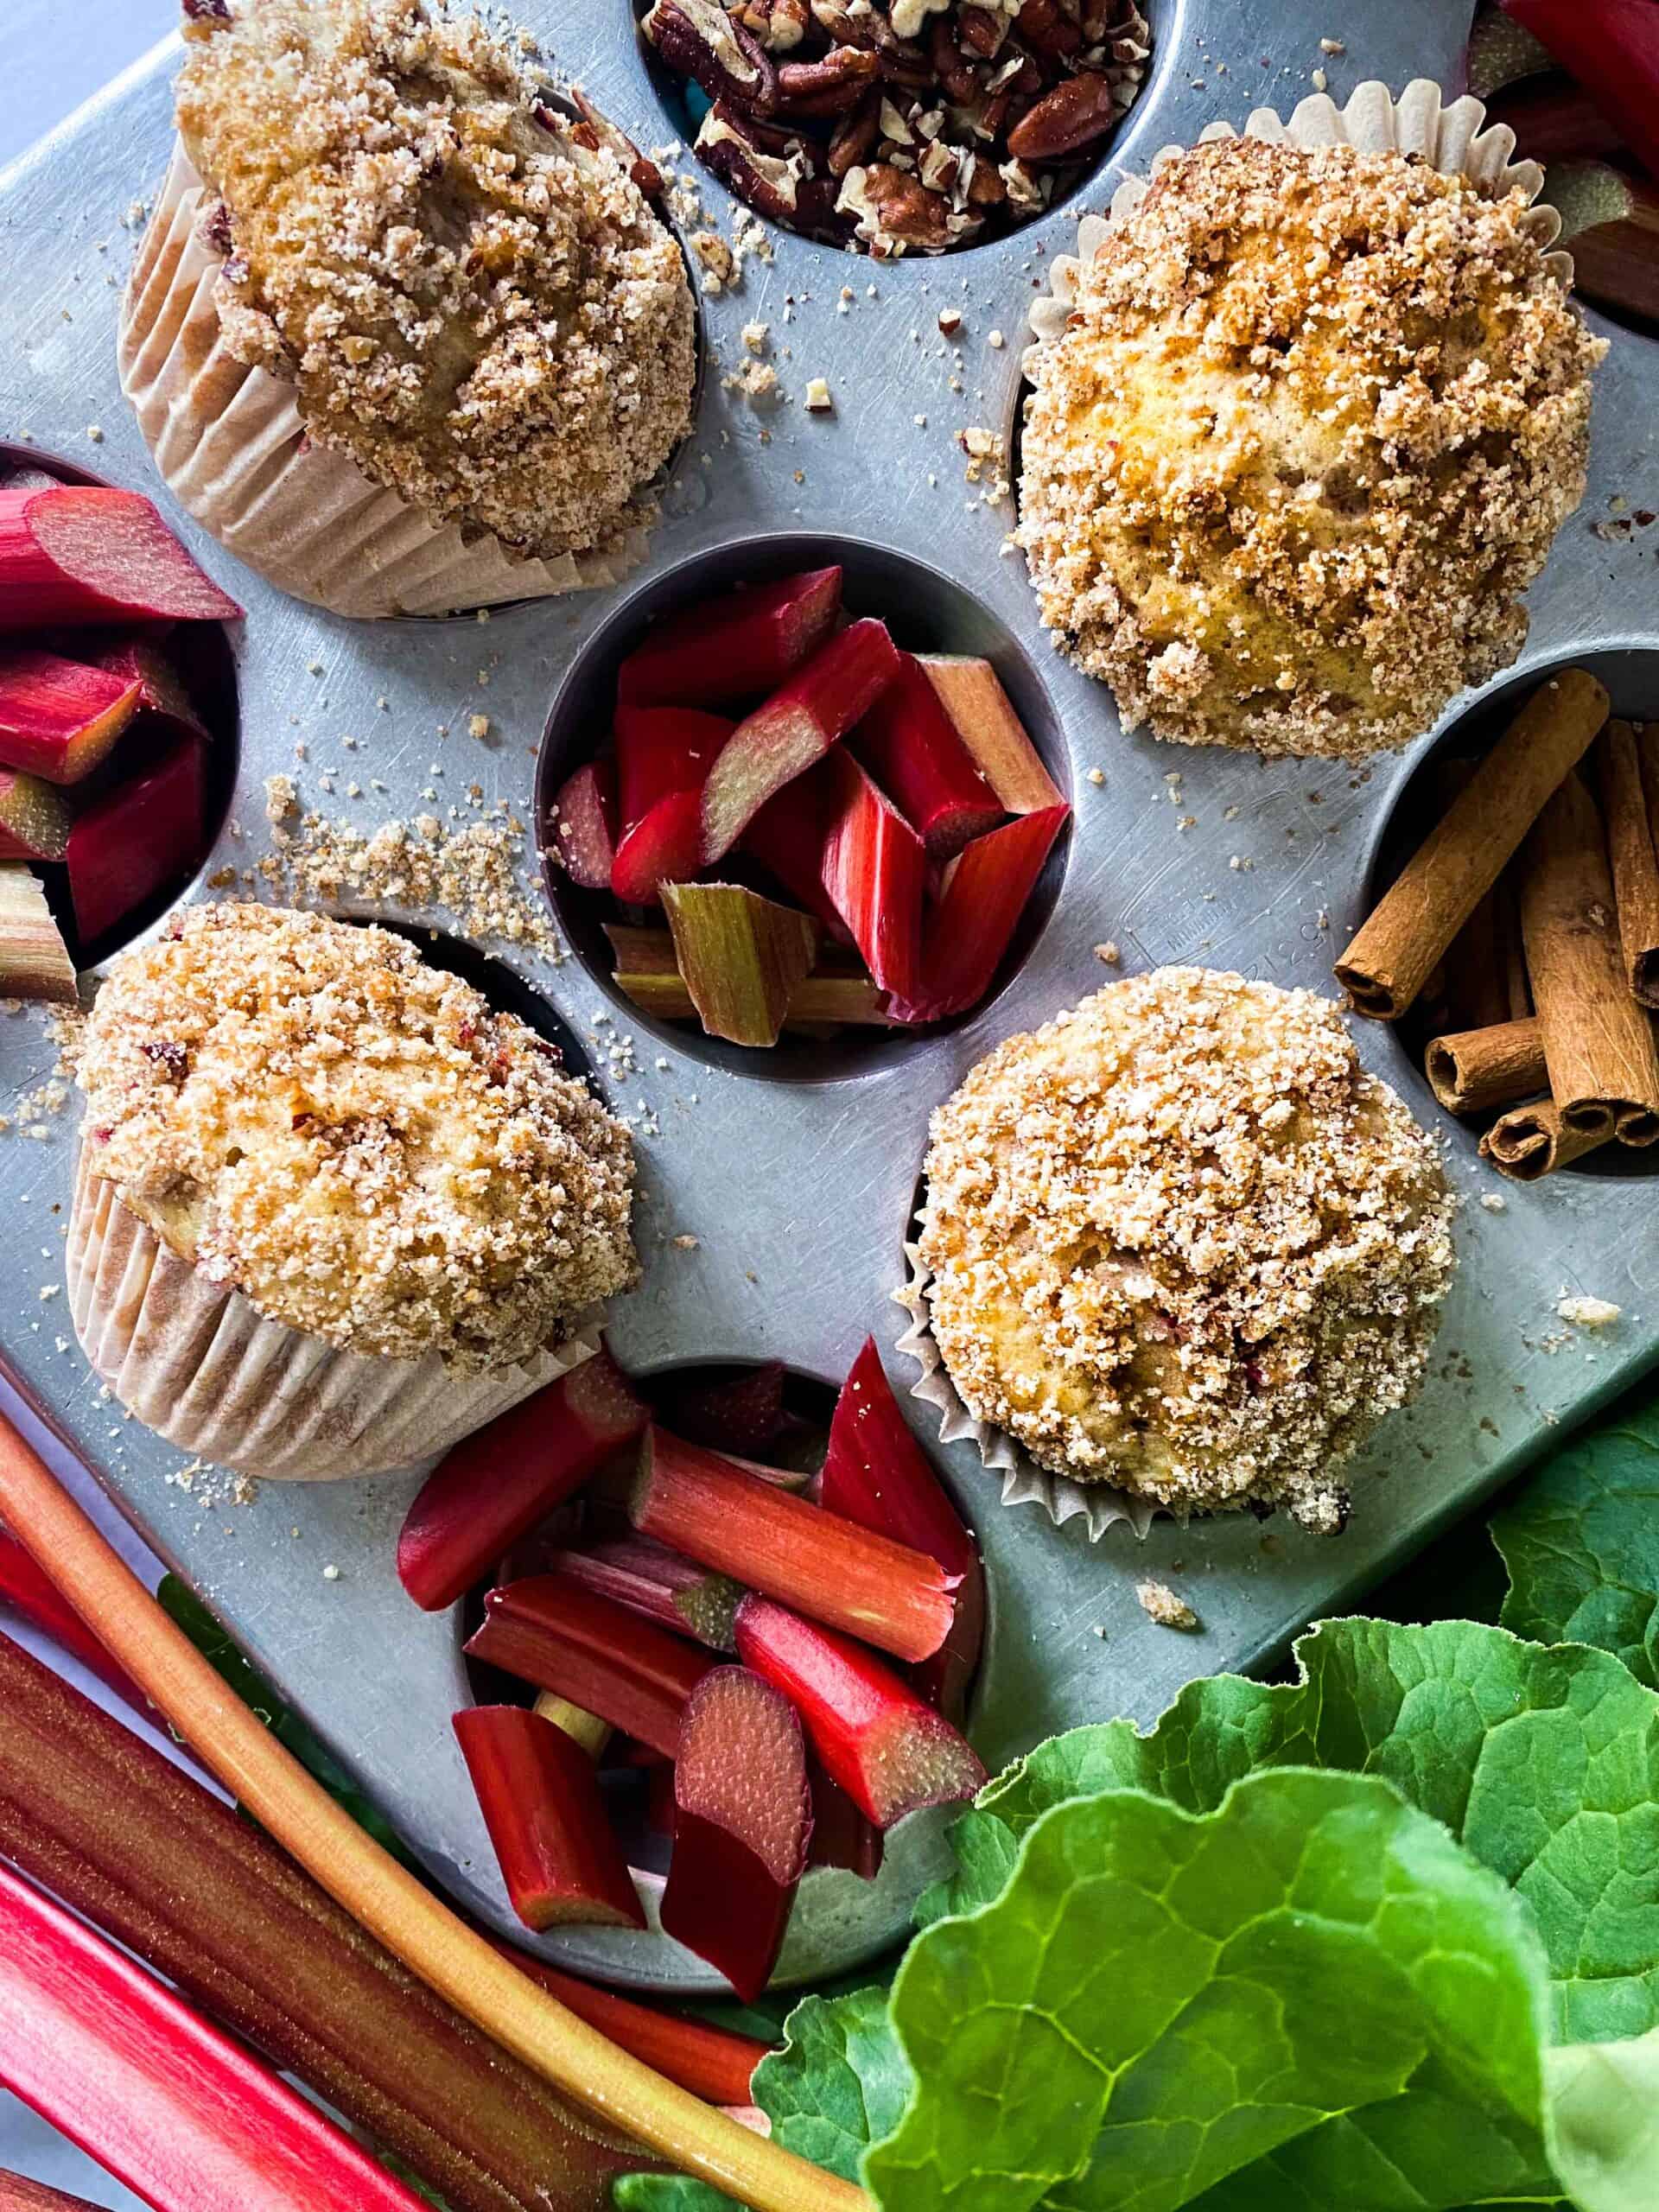 Rhubarb buttermilk muffins in a muffin tin with sliced rhubarb and rhubarb stalks with leaves behind. Cinnamon sticks and chopped pecan accompany the rhubarb muffins.